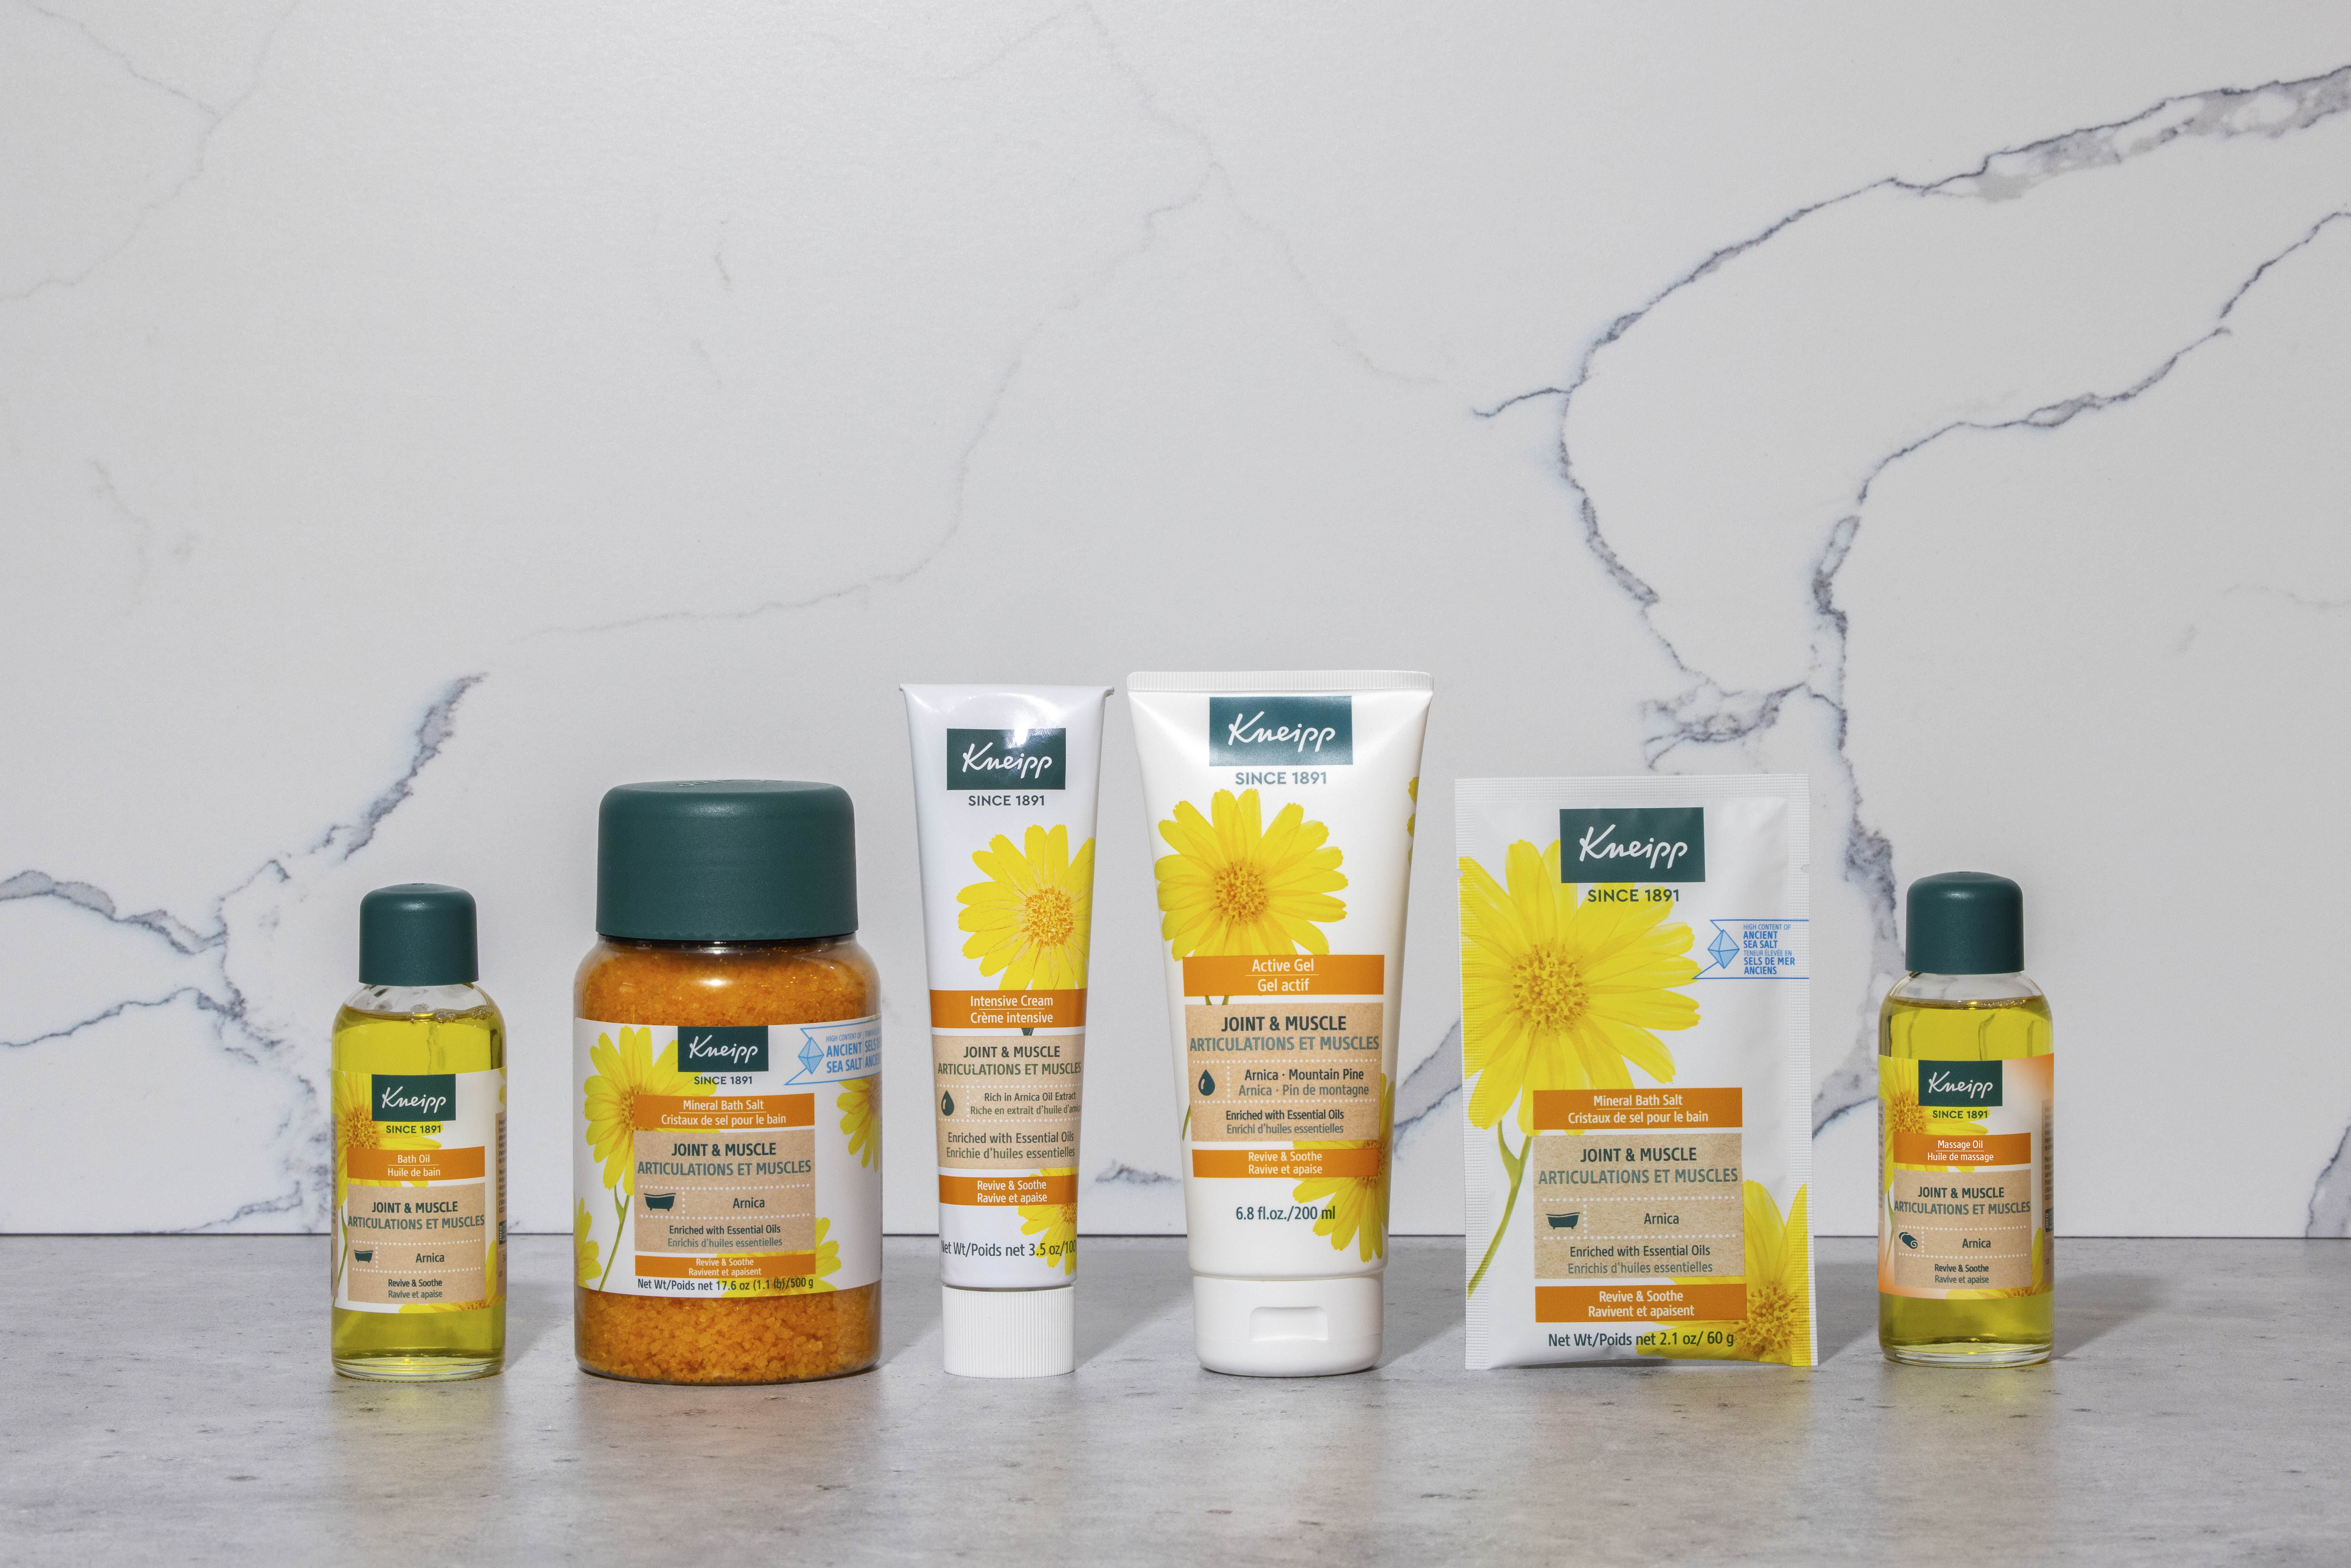 kneipp-website-banner-by-benefit-muscle-and-joint-relief